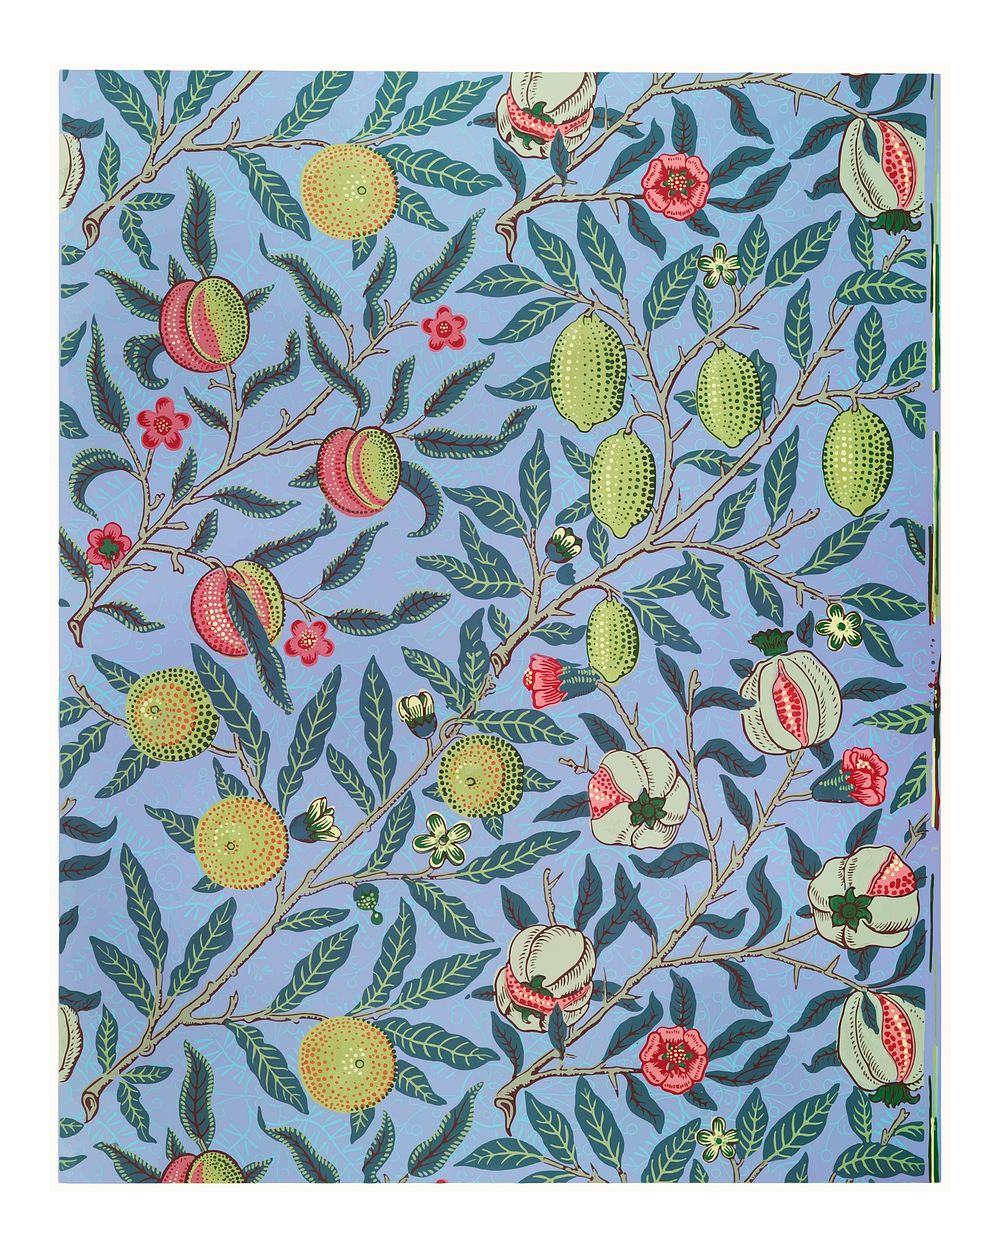 Vintage fruit illustration wall art print and poster design remix from the original artwork by William Morris.